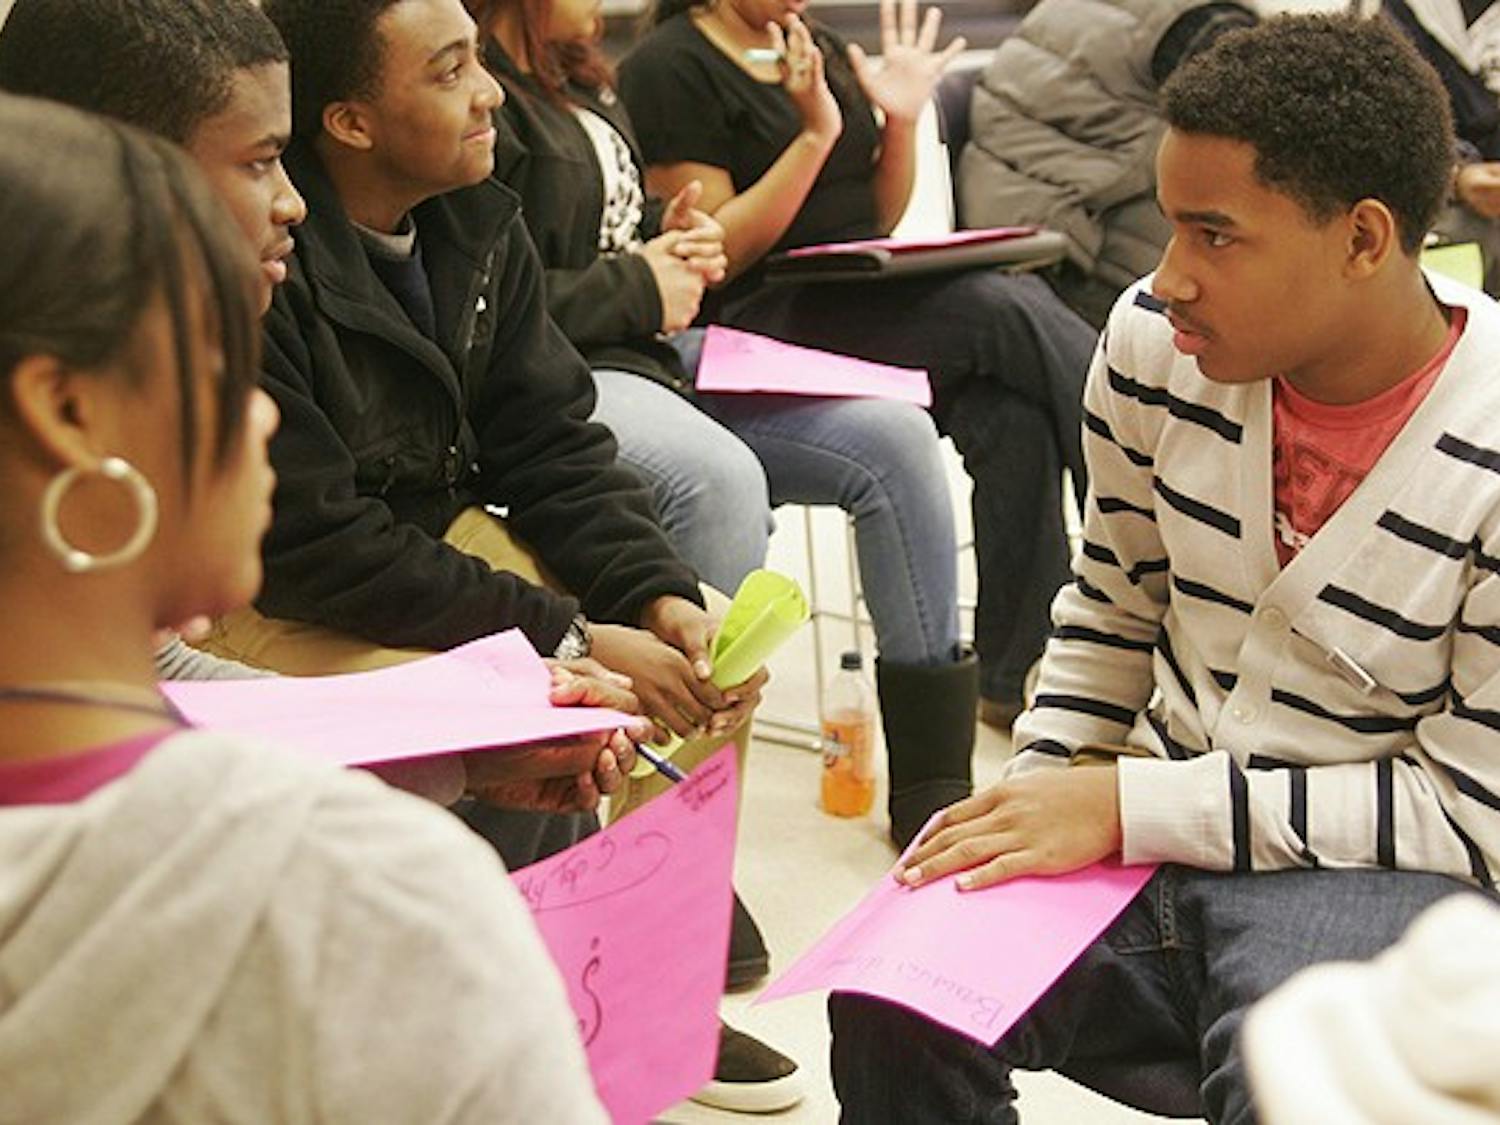 On Monday, a Youth Leadership Program for high school students was held in the Union sponsored by Carolina R.O.C.T.S. This year's theme was "Revitalizing the Dream: The time is always right to do what is right." Cameron Heath (in stripes), a sophomore in high school, talks about values that are important to him with other students. "I've learned that you can share similar community values with other people."